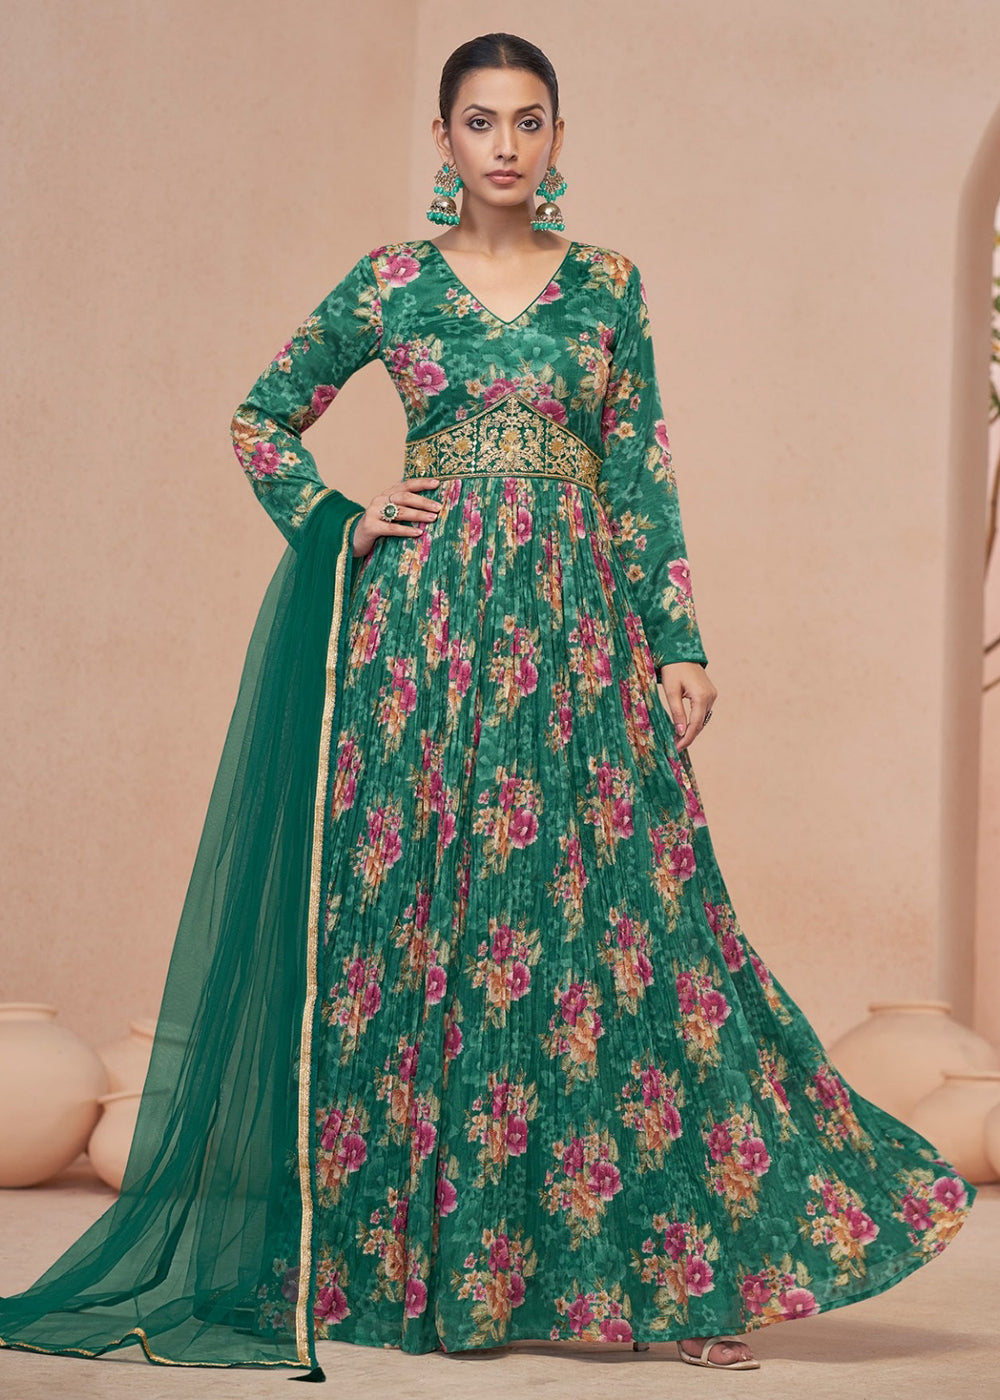 Buy Now Digital Printed Green Embroidered Wedding Anarkali Gown Online in USA, UK, Australia, New Zealand, Canada & Worldwide at Empress Clothing.